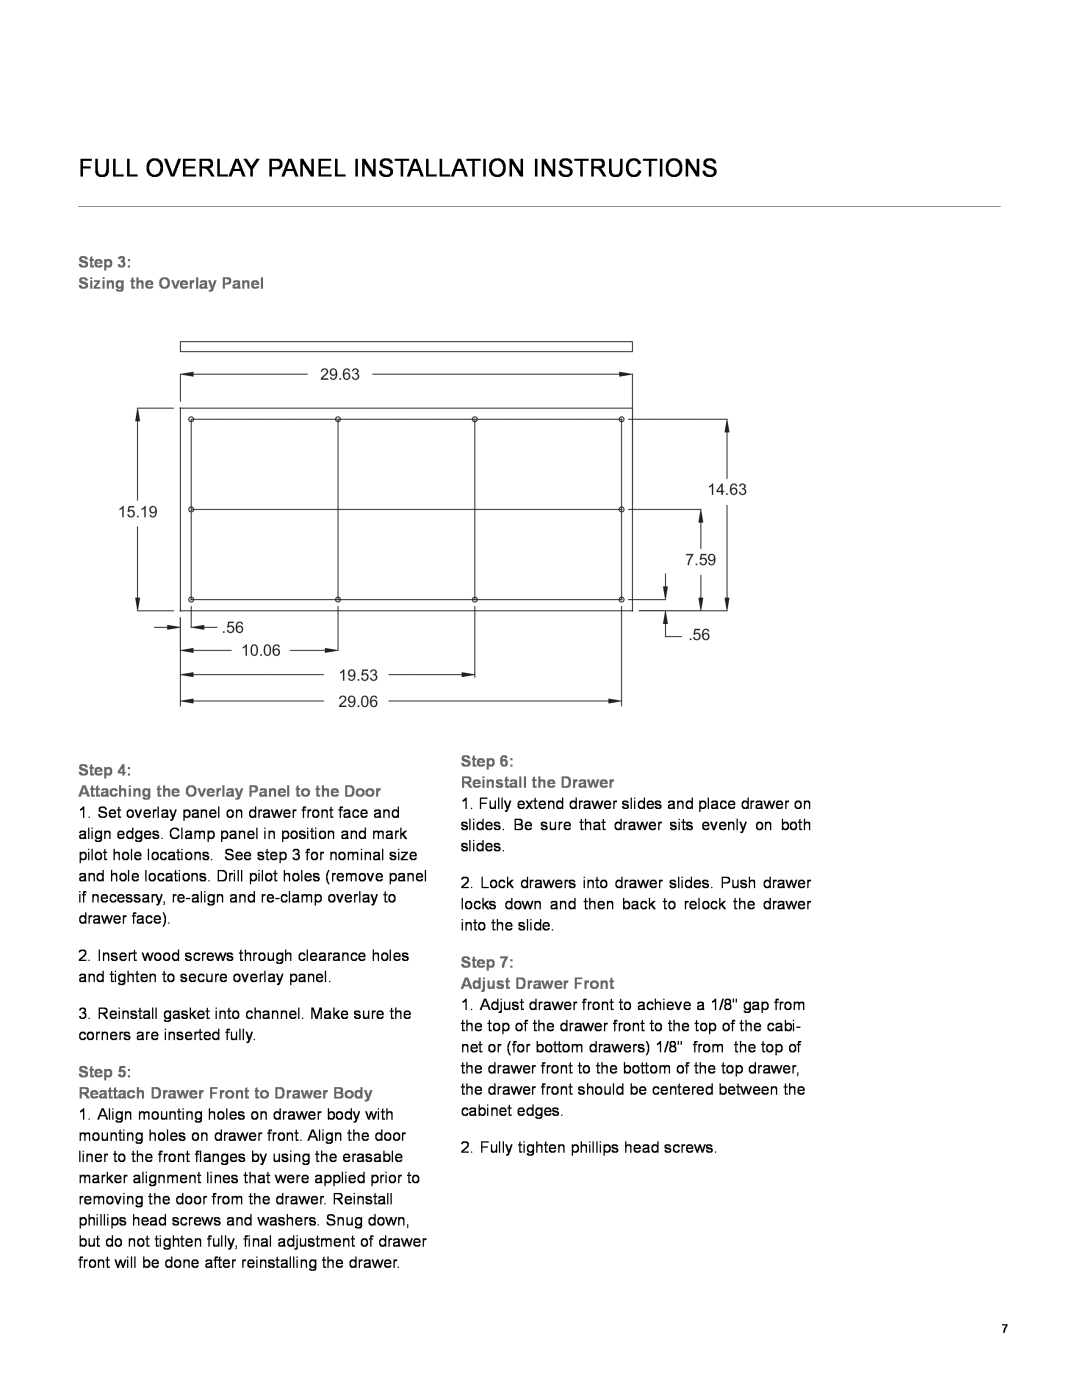 Marvel Industries 80RD manual Full Overlay Panel Installation Instructions, Step Sizing the Overlay Panel 